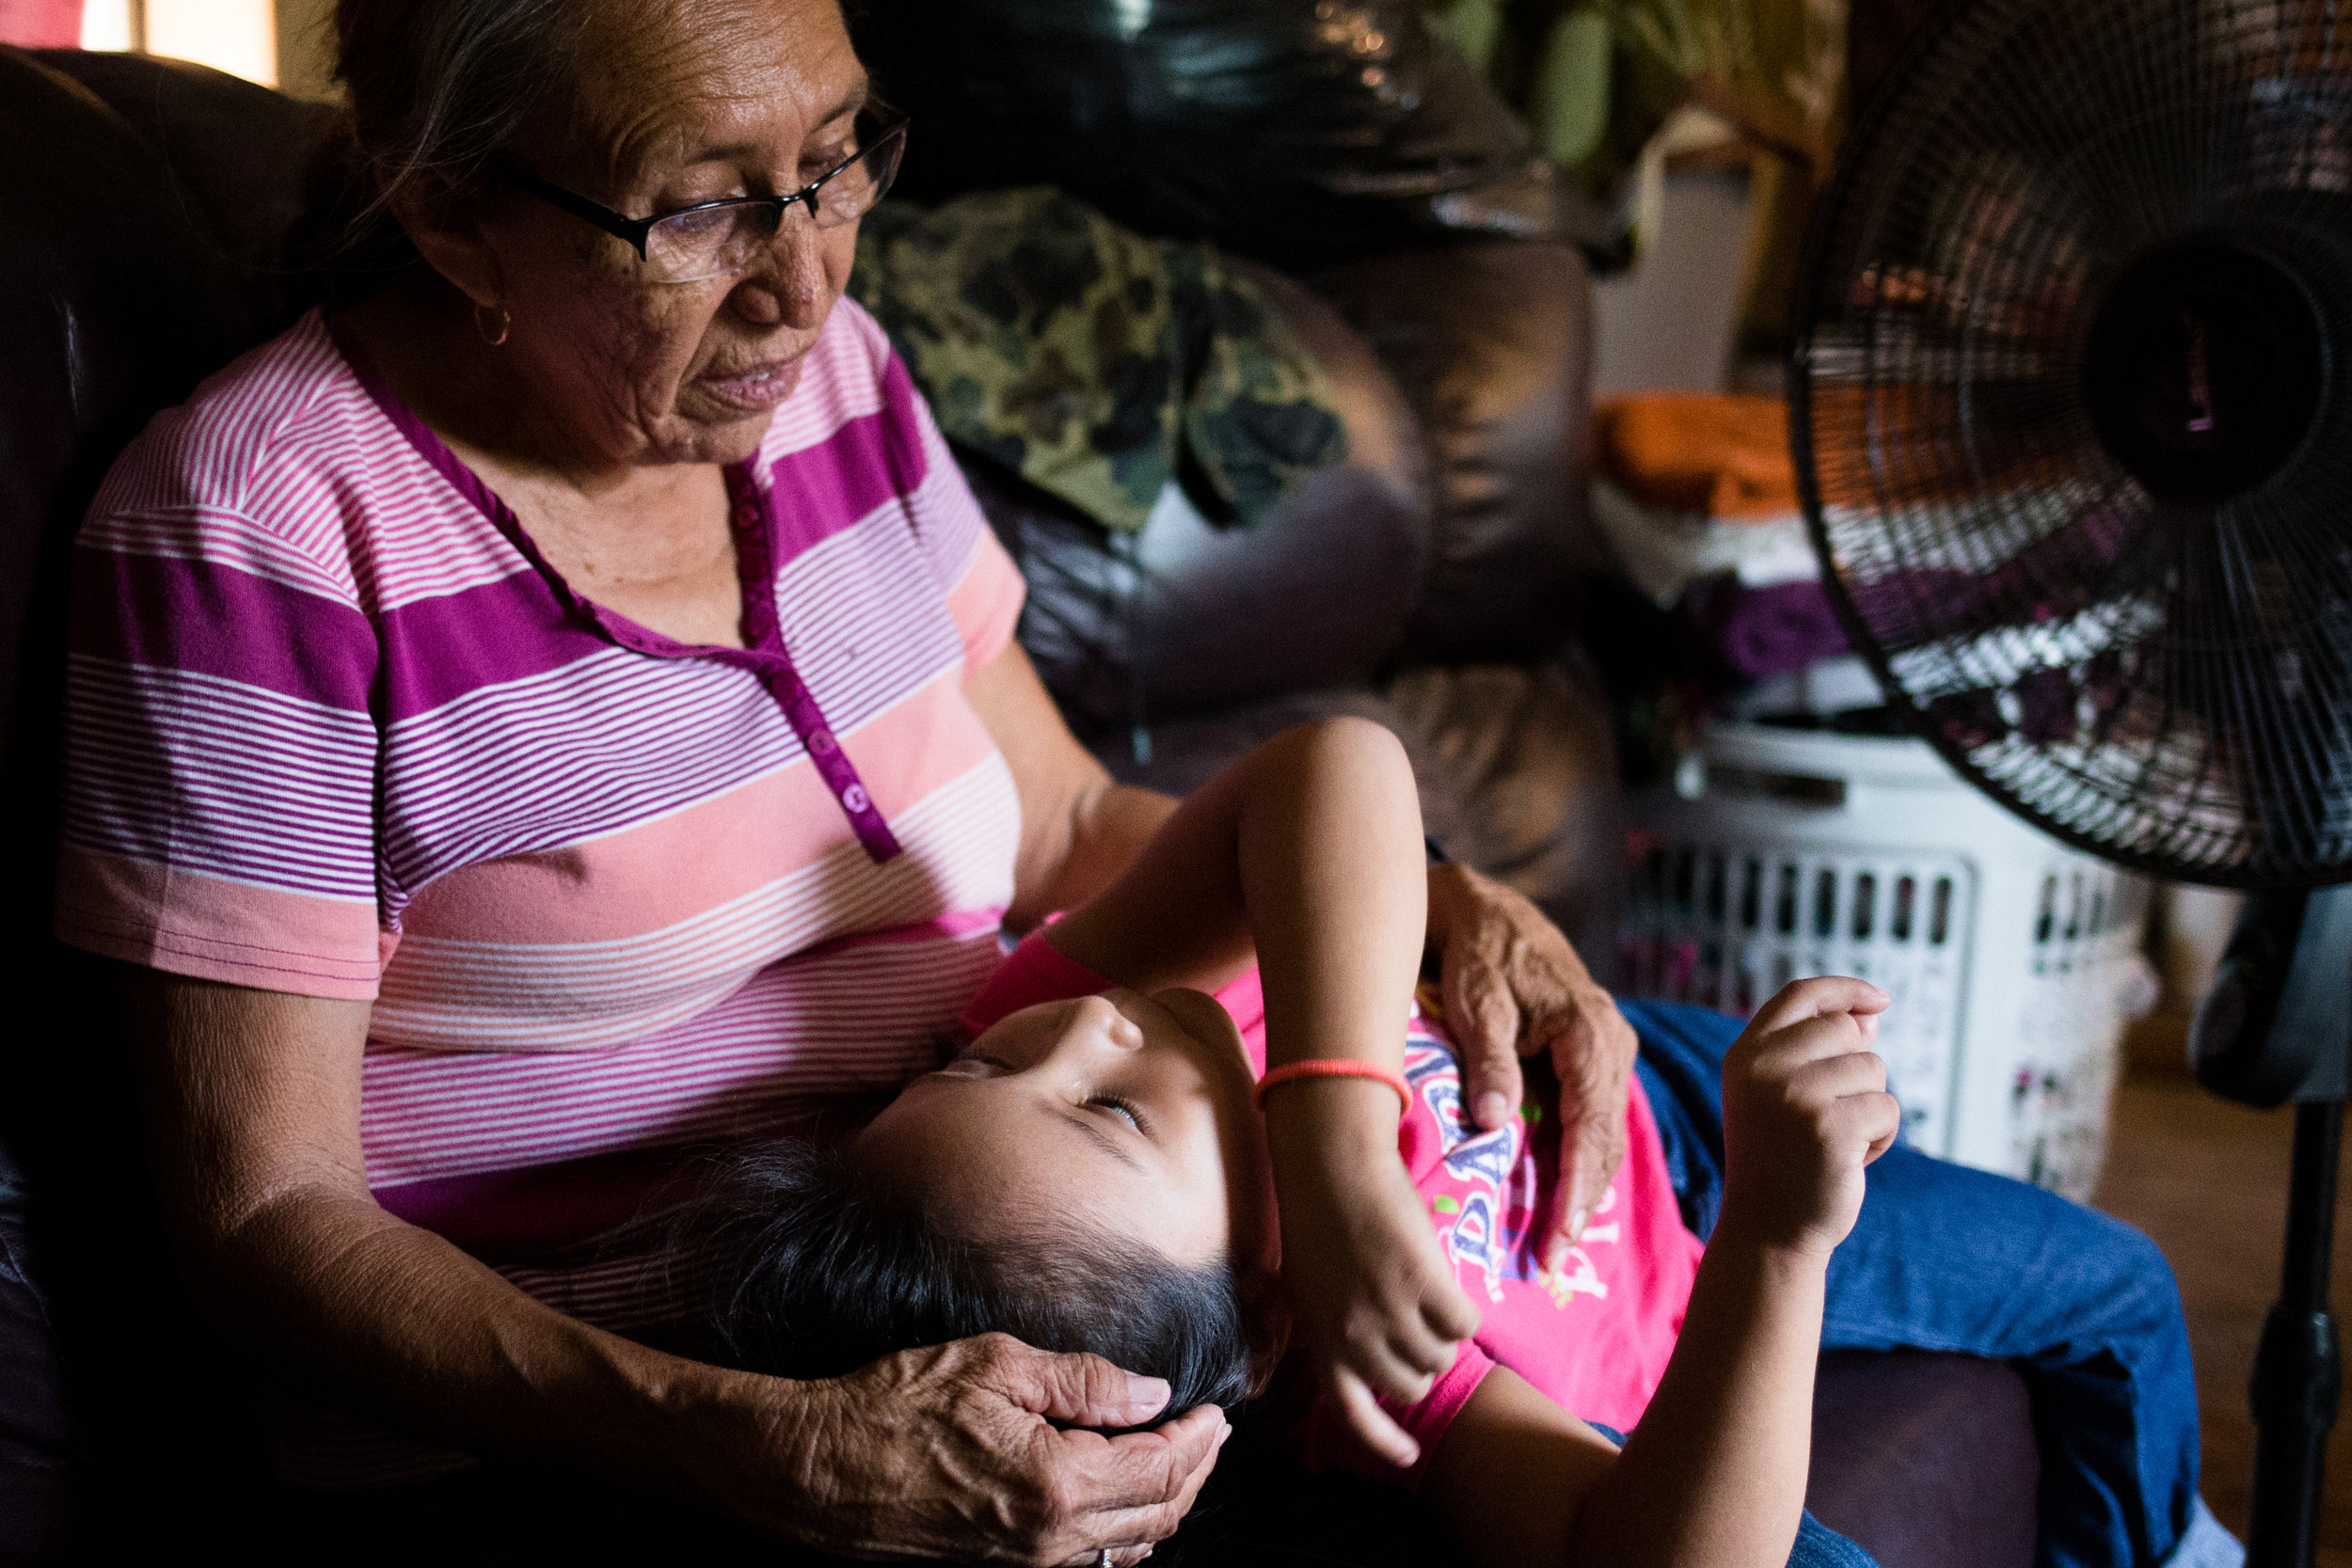  Teresa and her grandchild, Ashlee, rest for a moment by one of three fans used to keep the heat at bay in their poorly insulated mobile home. Teresa quit her job as a home care provider to care for her children, but she and her adult daughter strugg